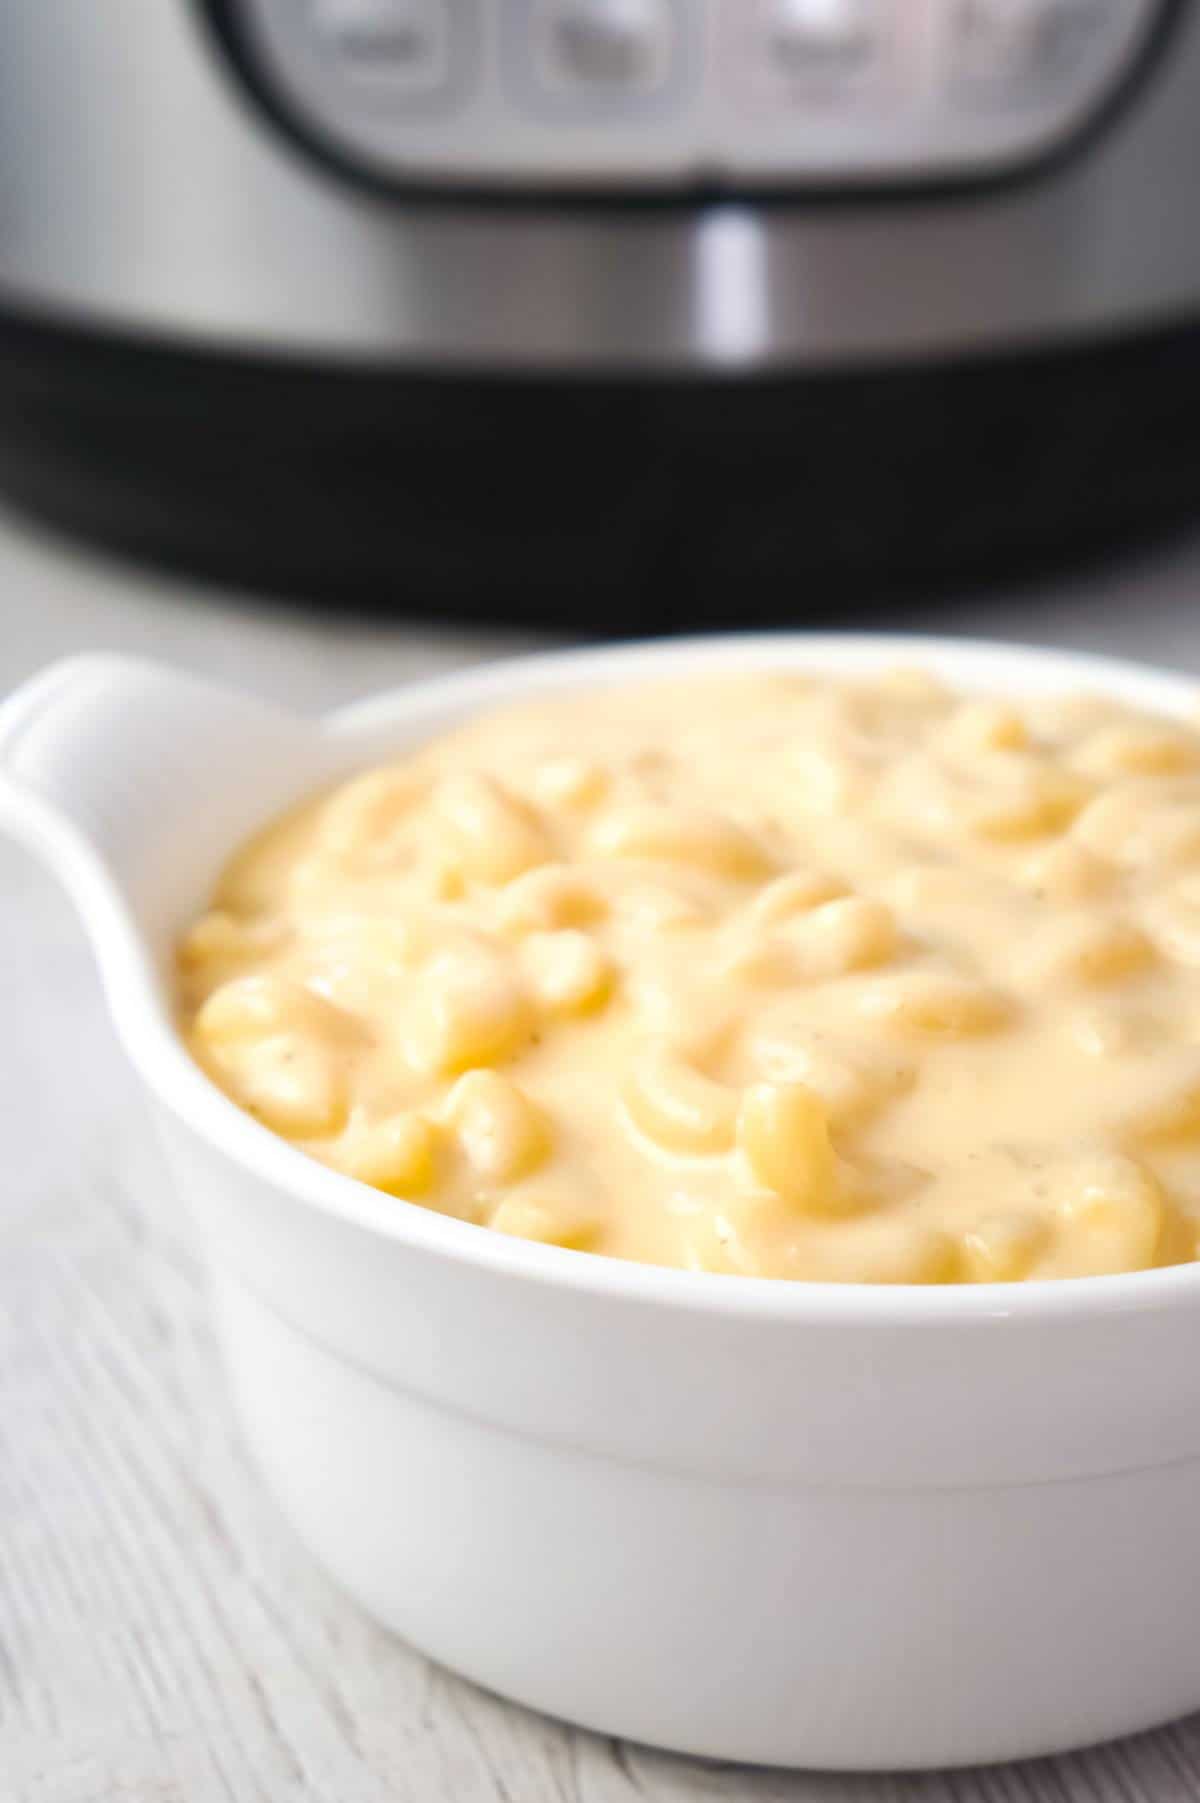 Instant Pot Extra Creamy Mac and Cheese is a simple and delicious pressure cooker pasta recipe made with cheddar cheese soup, heavy cream, mozzarella and cheddar cheese.